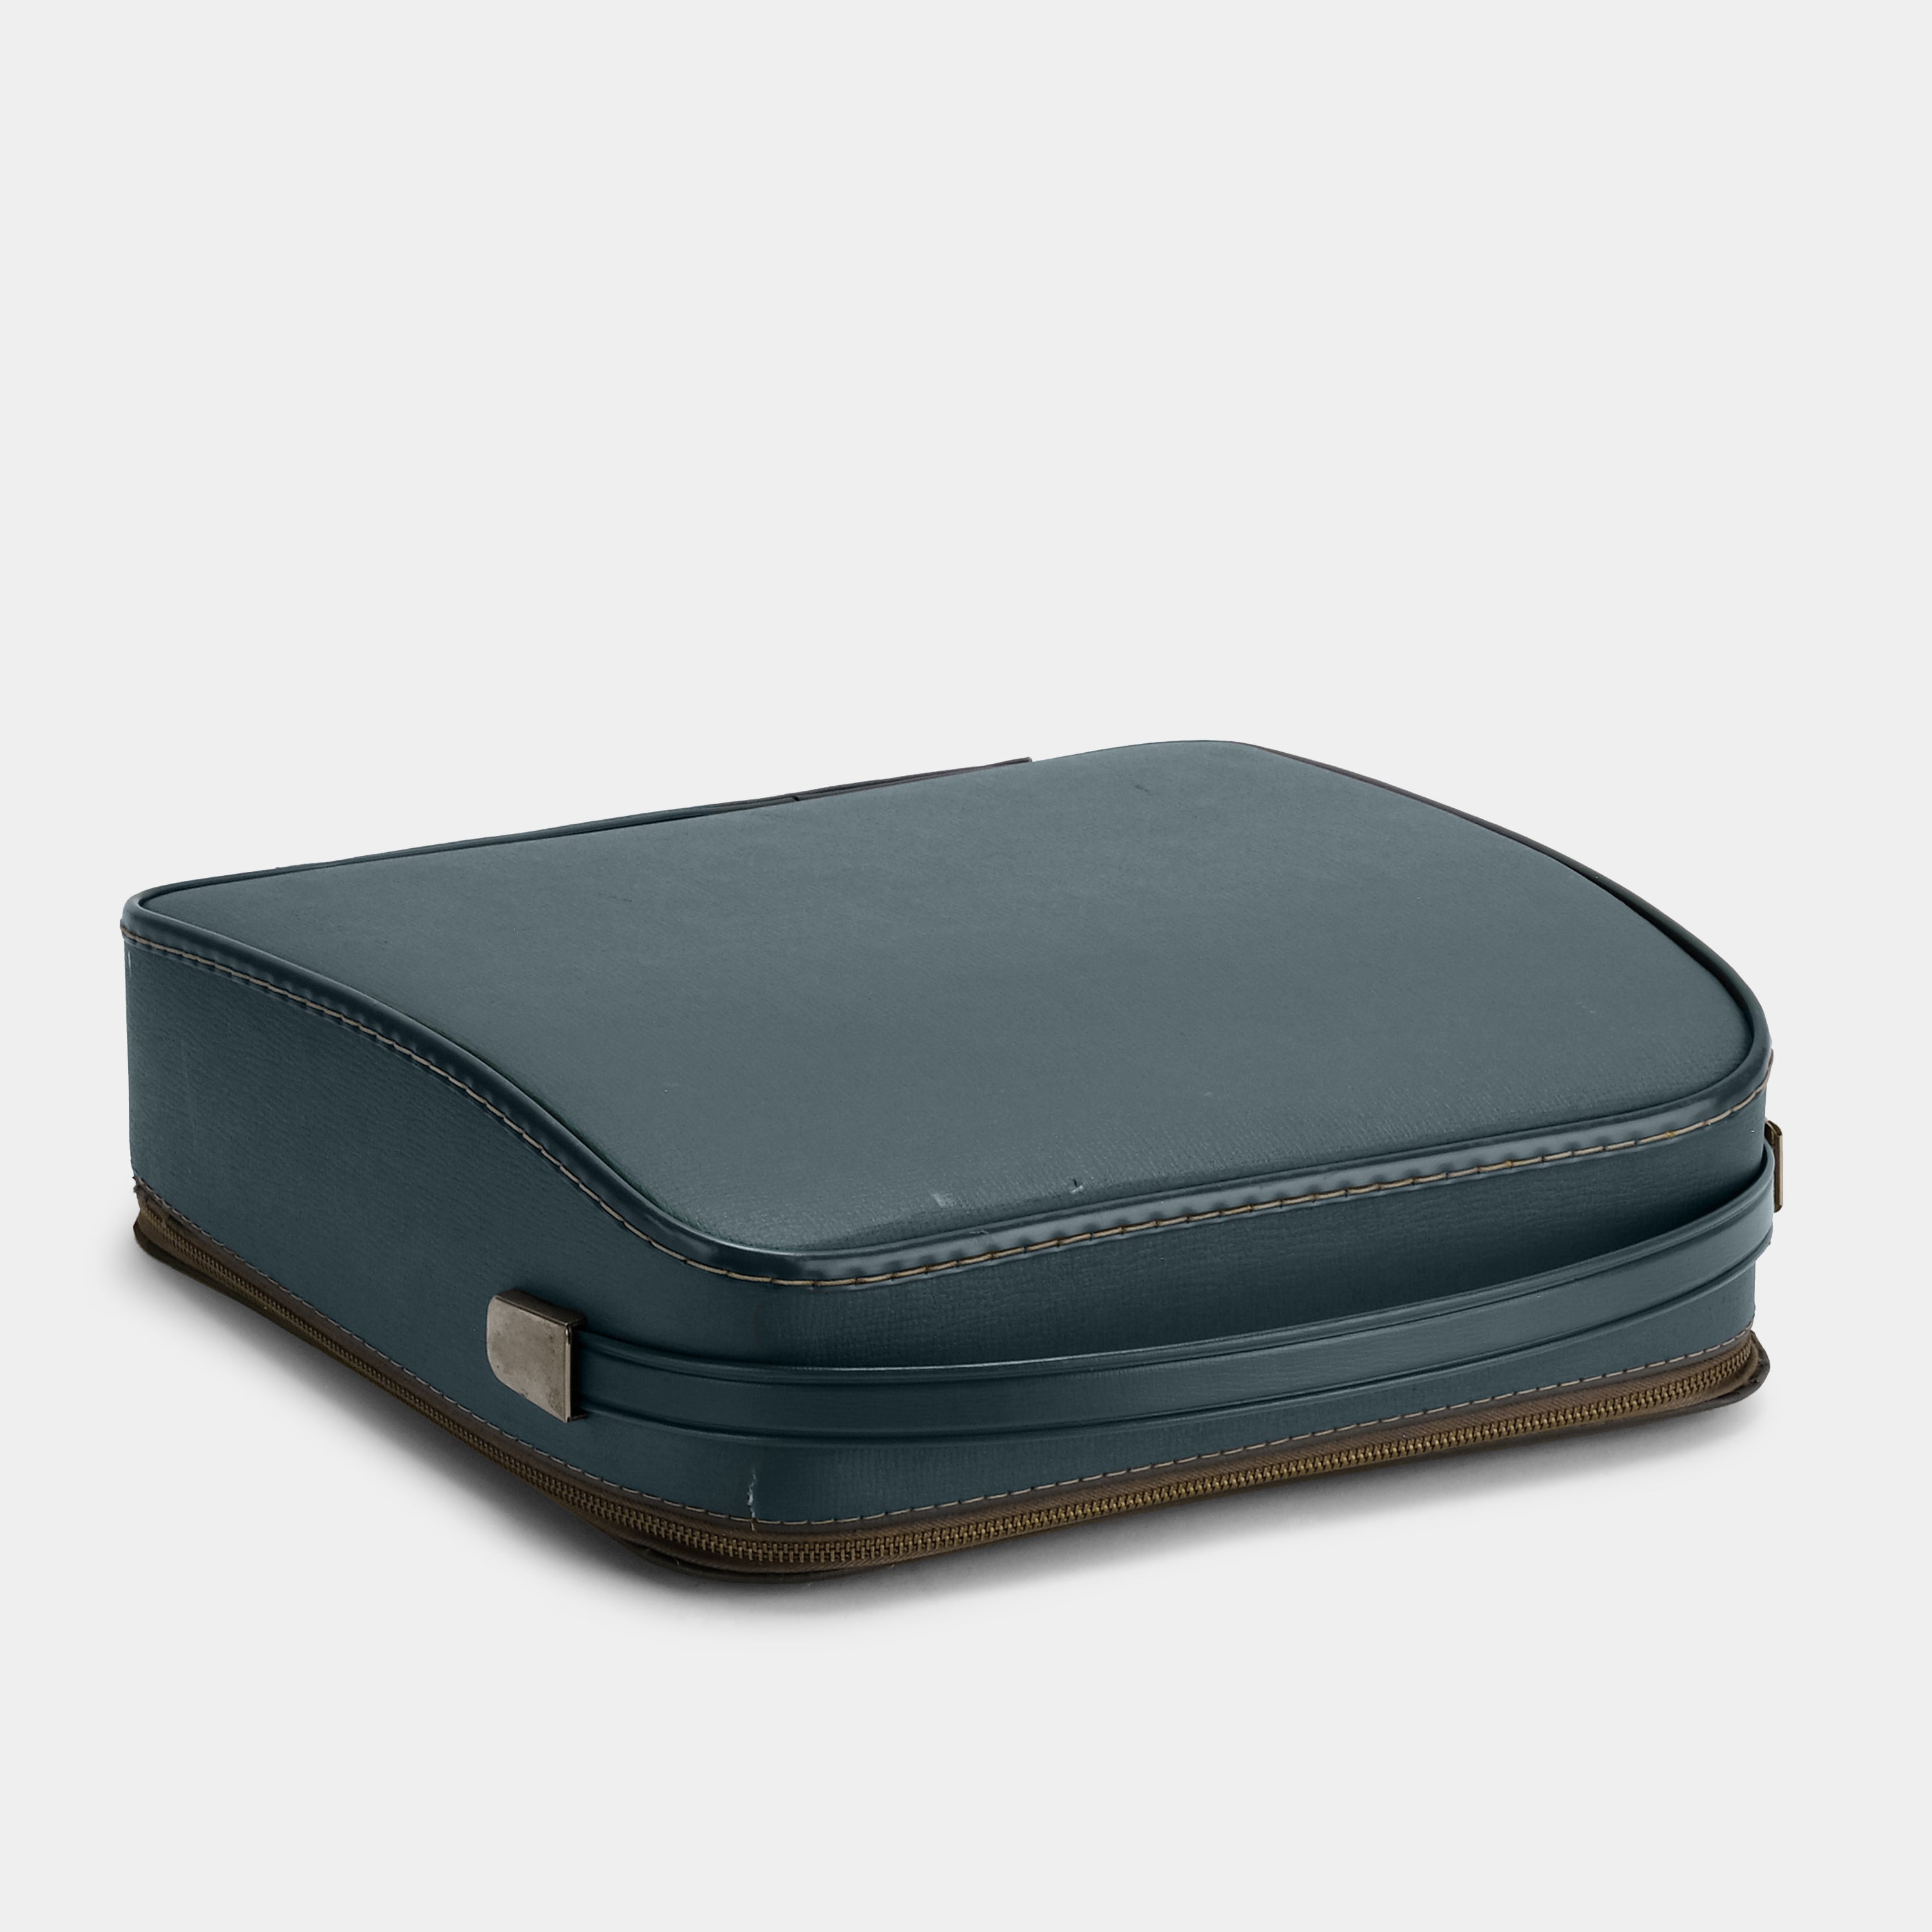 Webster XL-500 Blue Manual Typewriter and Leather Case